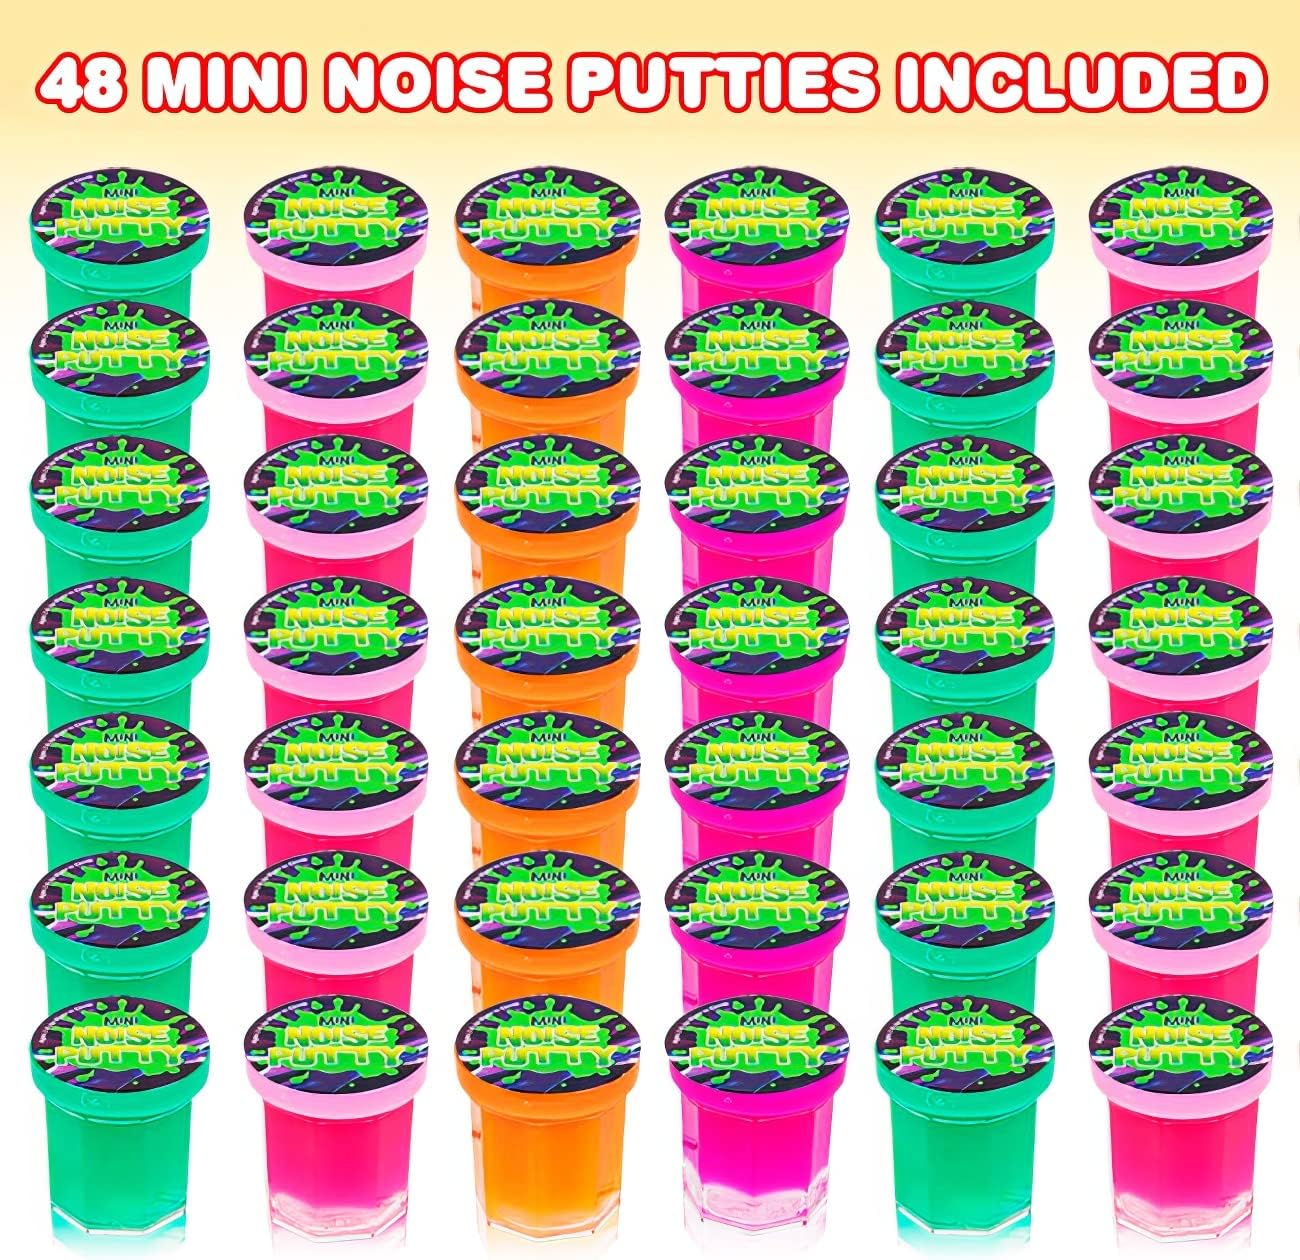 ArtCreativity Mini Noise Putty for Kids - Bulk Pack of 48 Slime - Assorted Vibrant Colors, Birthday Party Favors, Goodie Bag Stuffers, Piñata Filler, Funny Prank Toy, for Boys and Girls